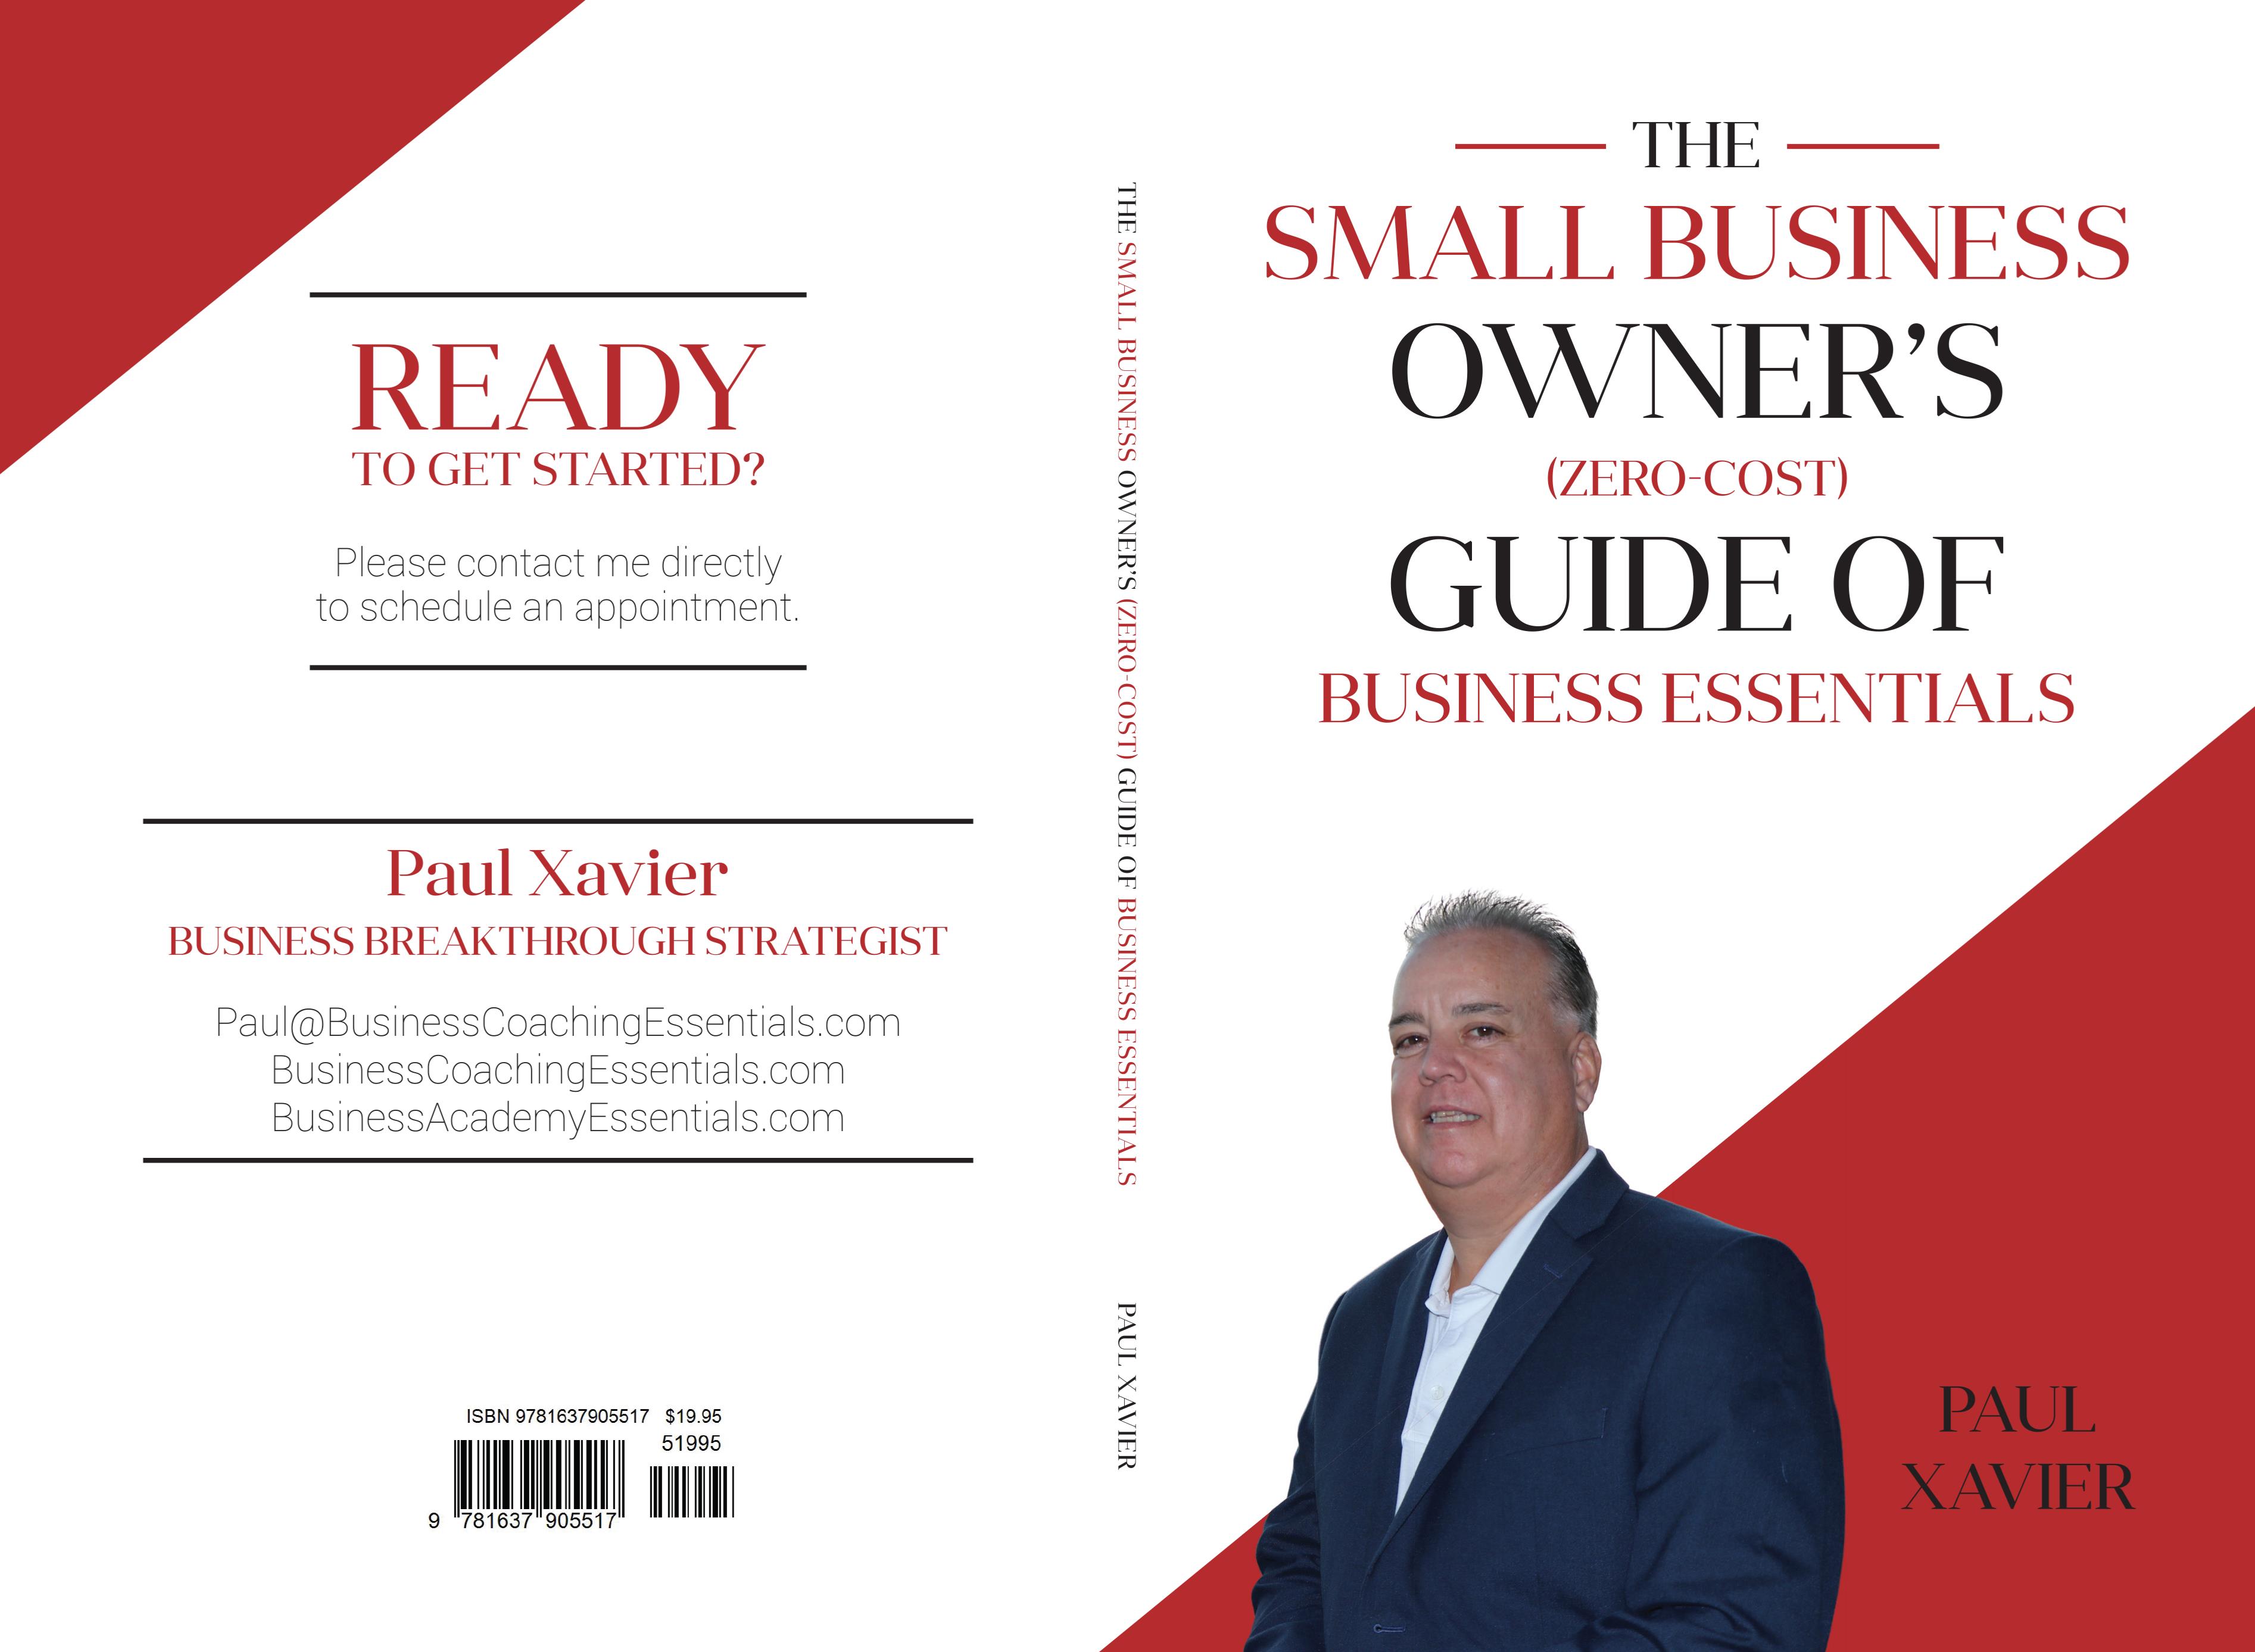 The Small Business Owner